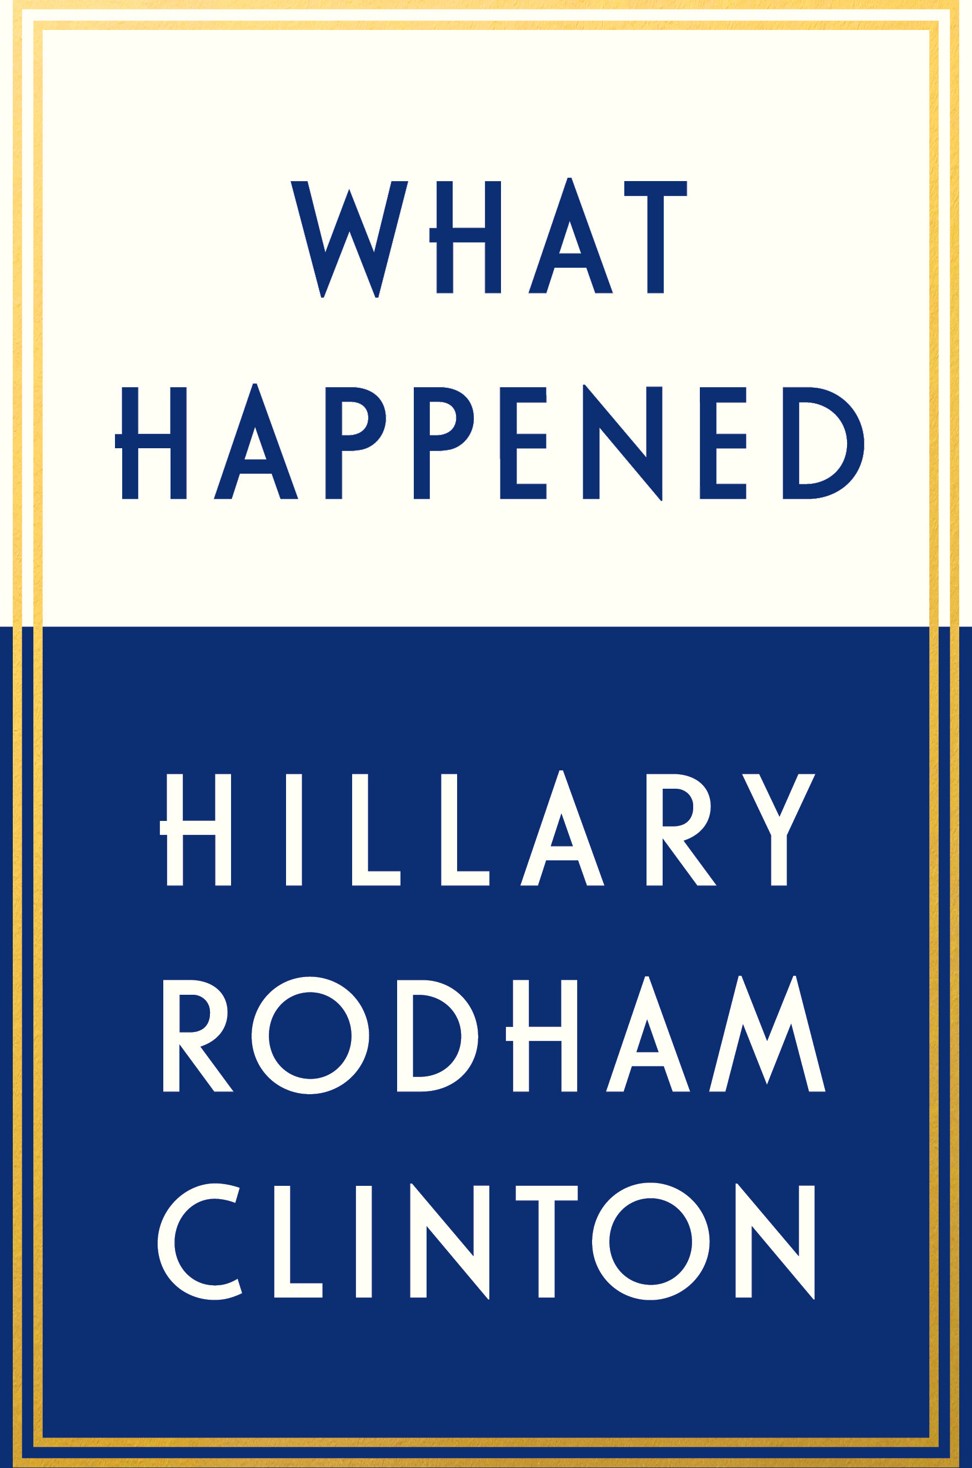 Hillary Clinton explains all in her book What Happened.